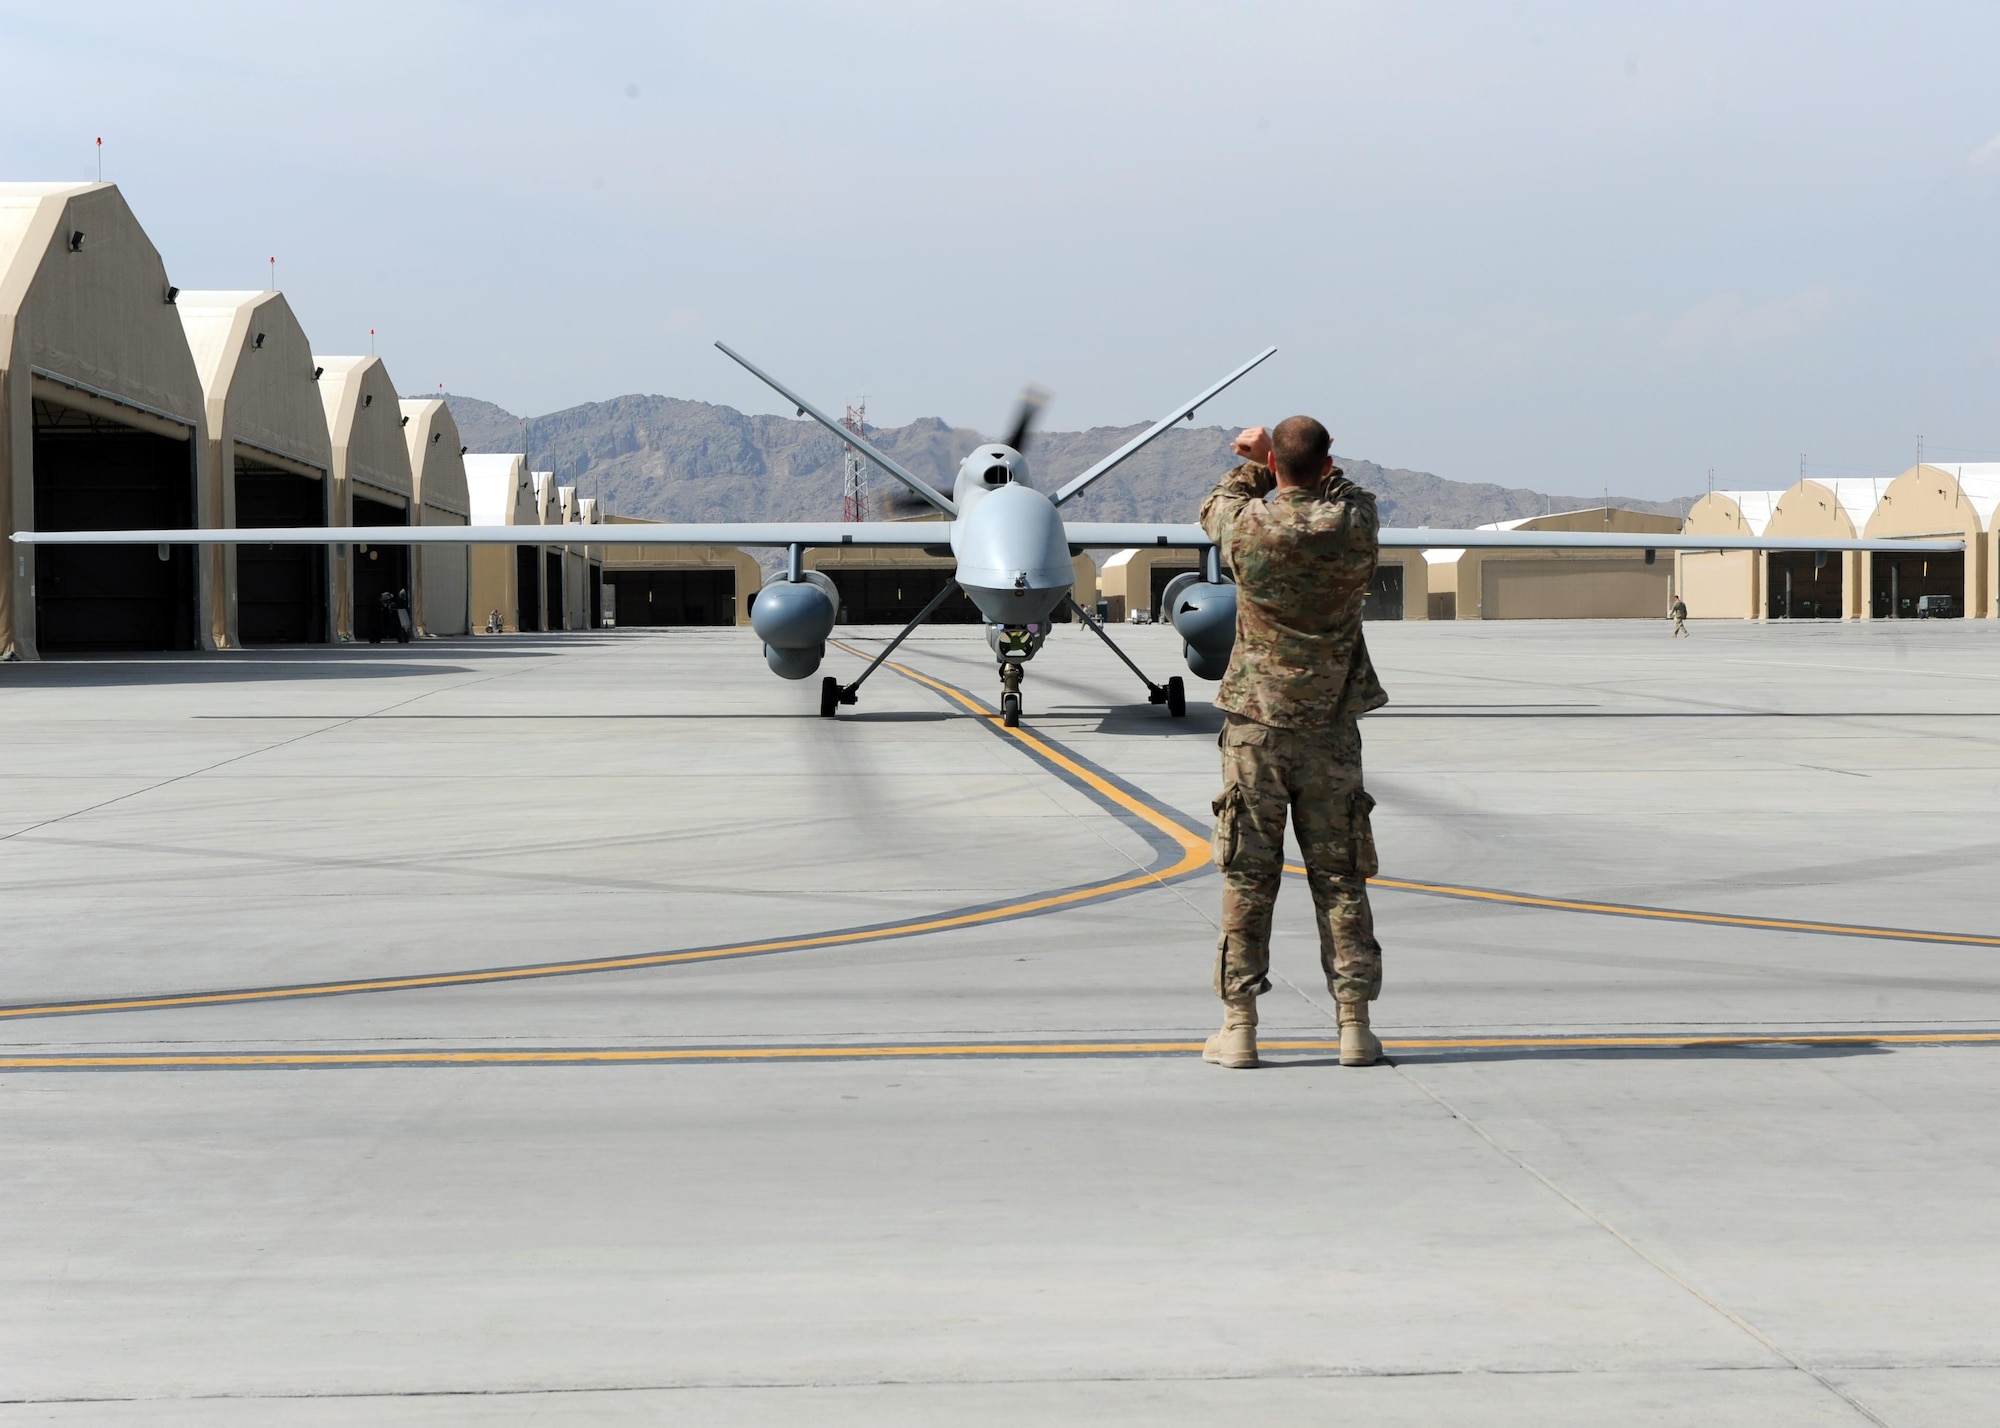 An Airman assigned to the 451st Expeditionary Aircraft Maintenance Squadron marshals an MQ-9 Reaper to the runway prior to launch March 20, 2015, at Kandahar Airfield, Afghanistan. Airmen assigned to the 451st EAMXS provide 24/7 maintenance support to the Air Force’s largest Reaper unit, ensuring ground troops are supported around the clock. (U.S. Air Force photo/Staff Sgt. Whitney Amstutz)